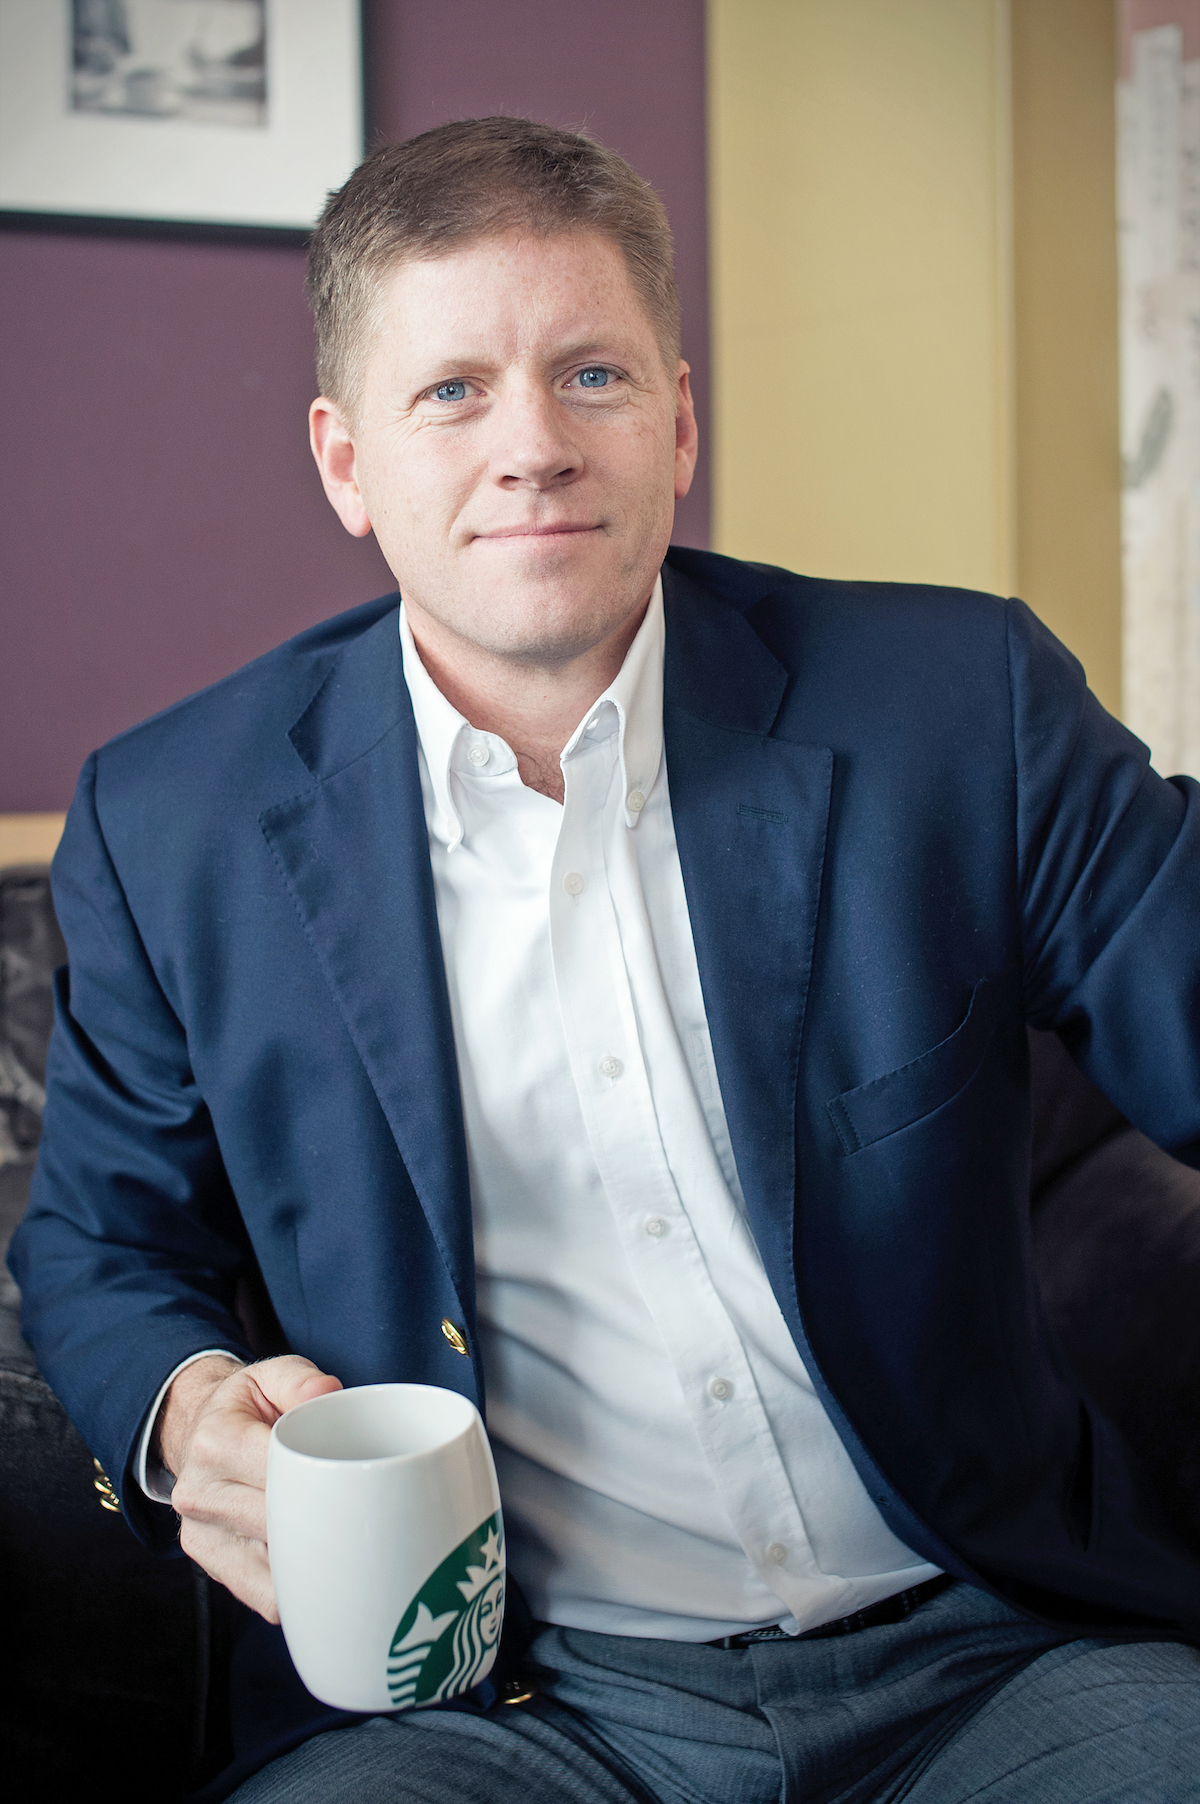 Henry McGovern, Founder & CEO of AmRest Holding